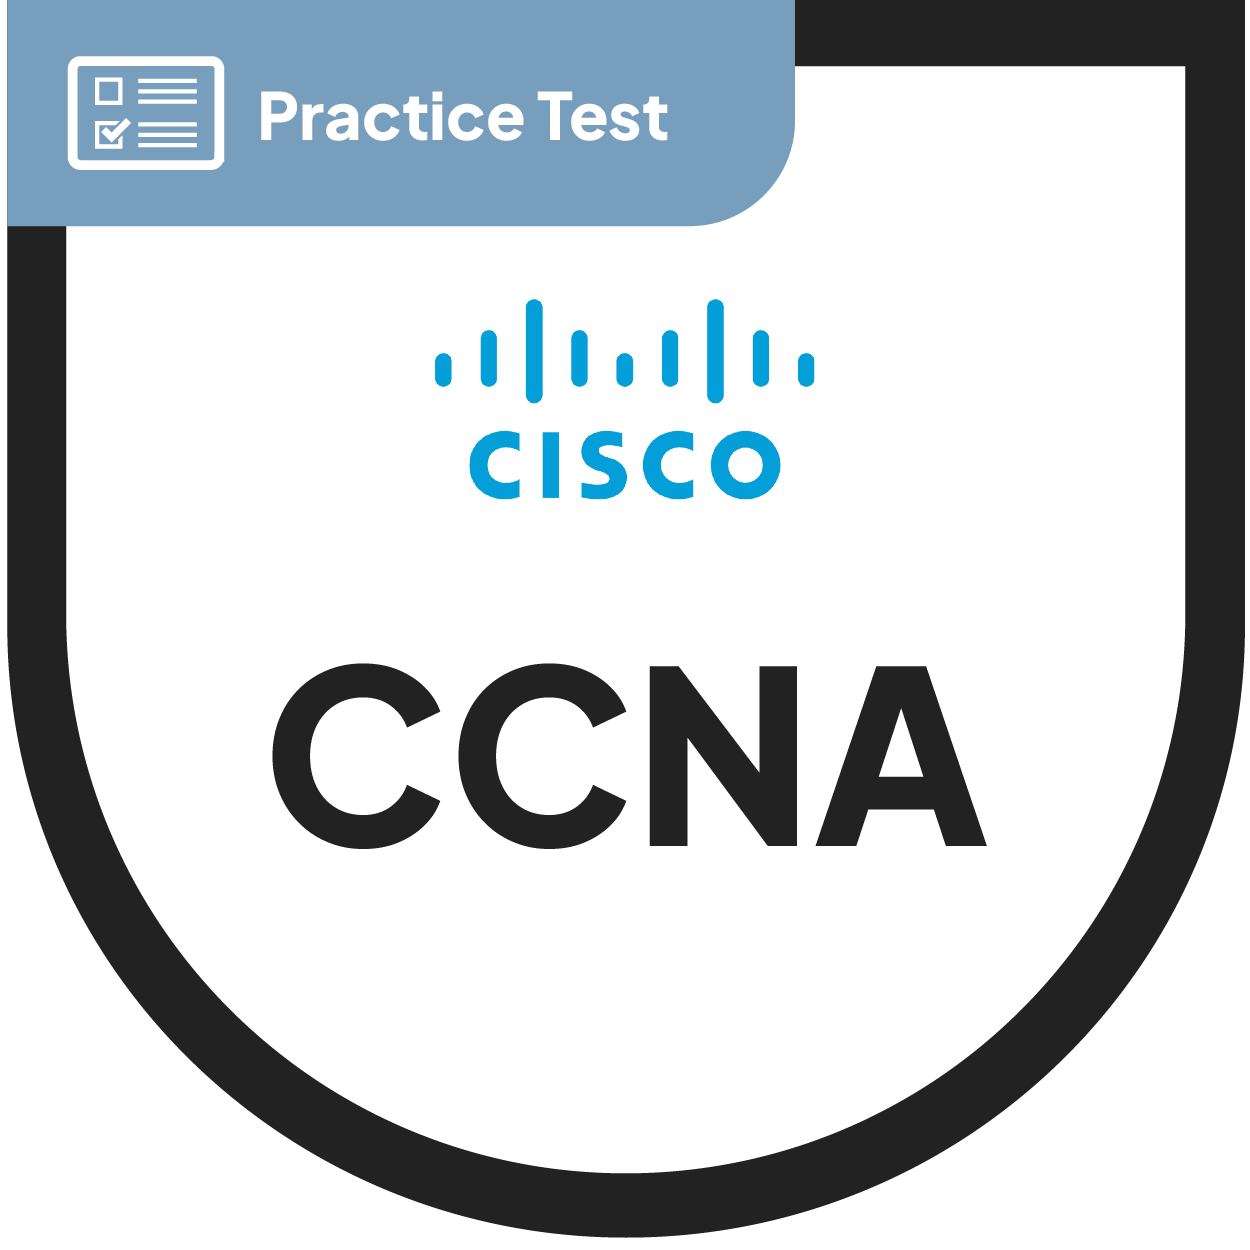 Oracle Practice Tests, Labs, and Vouchers - CyberVista